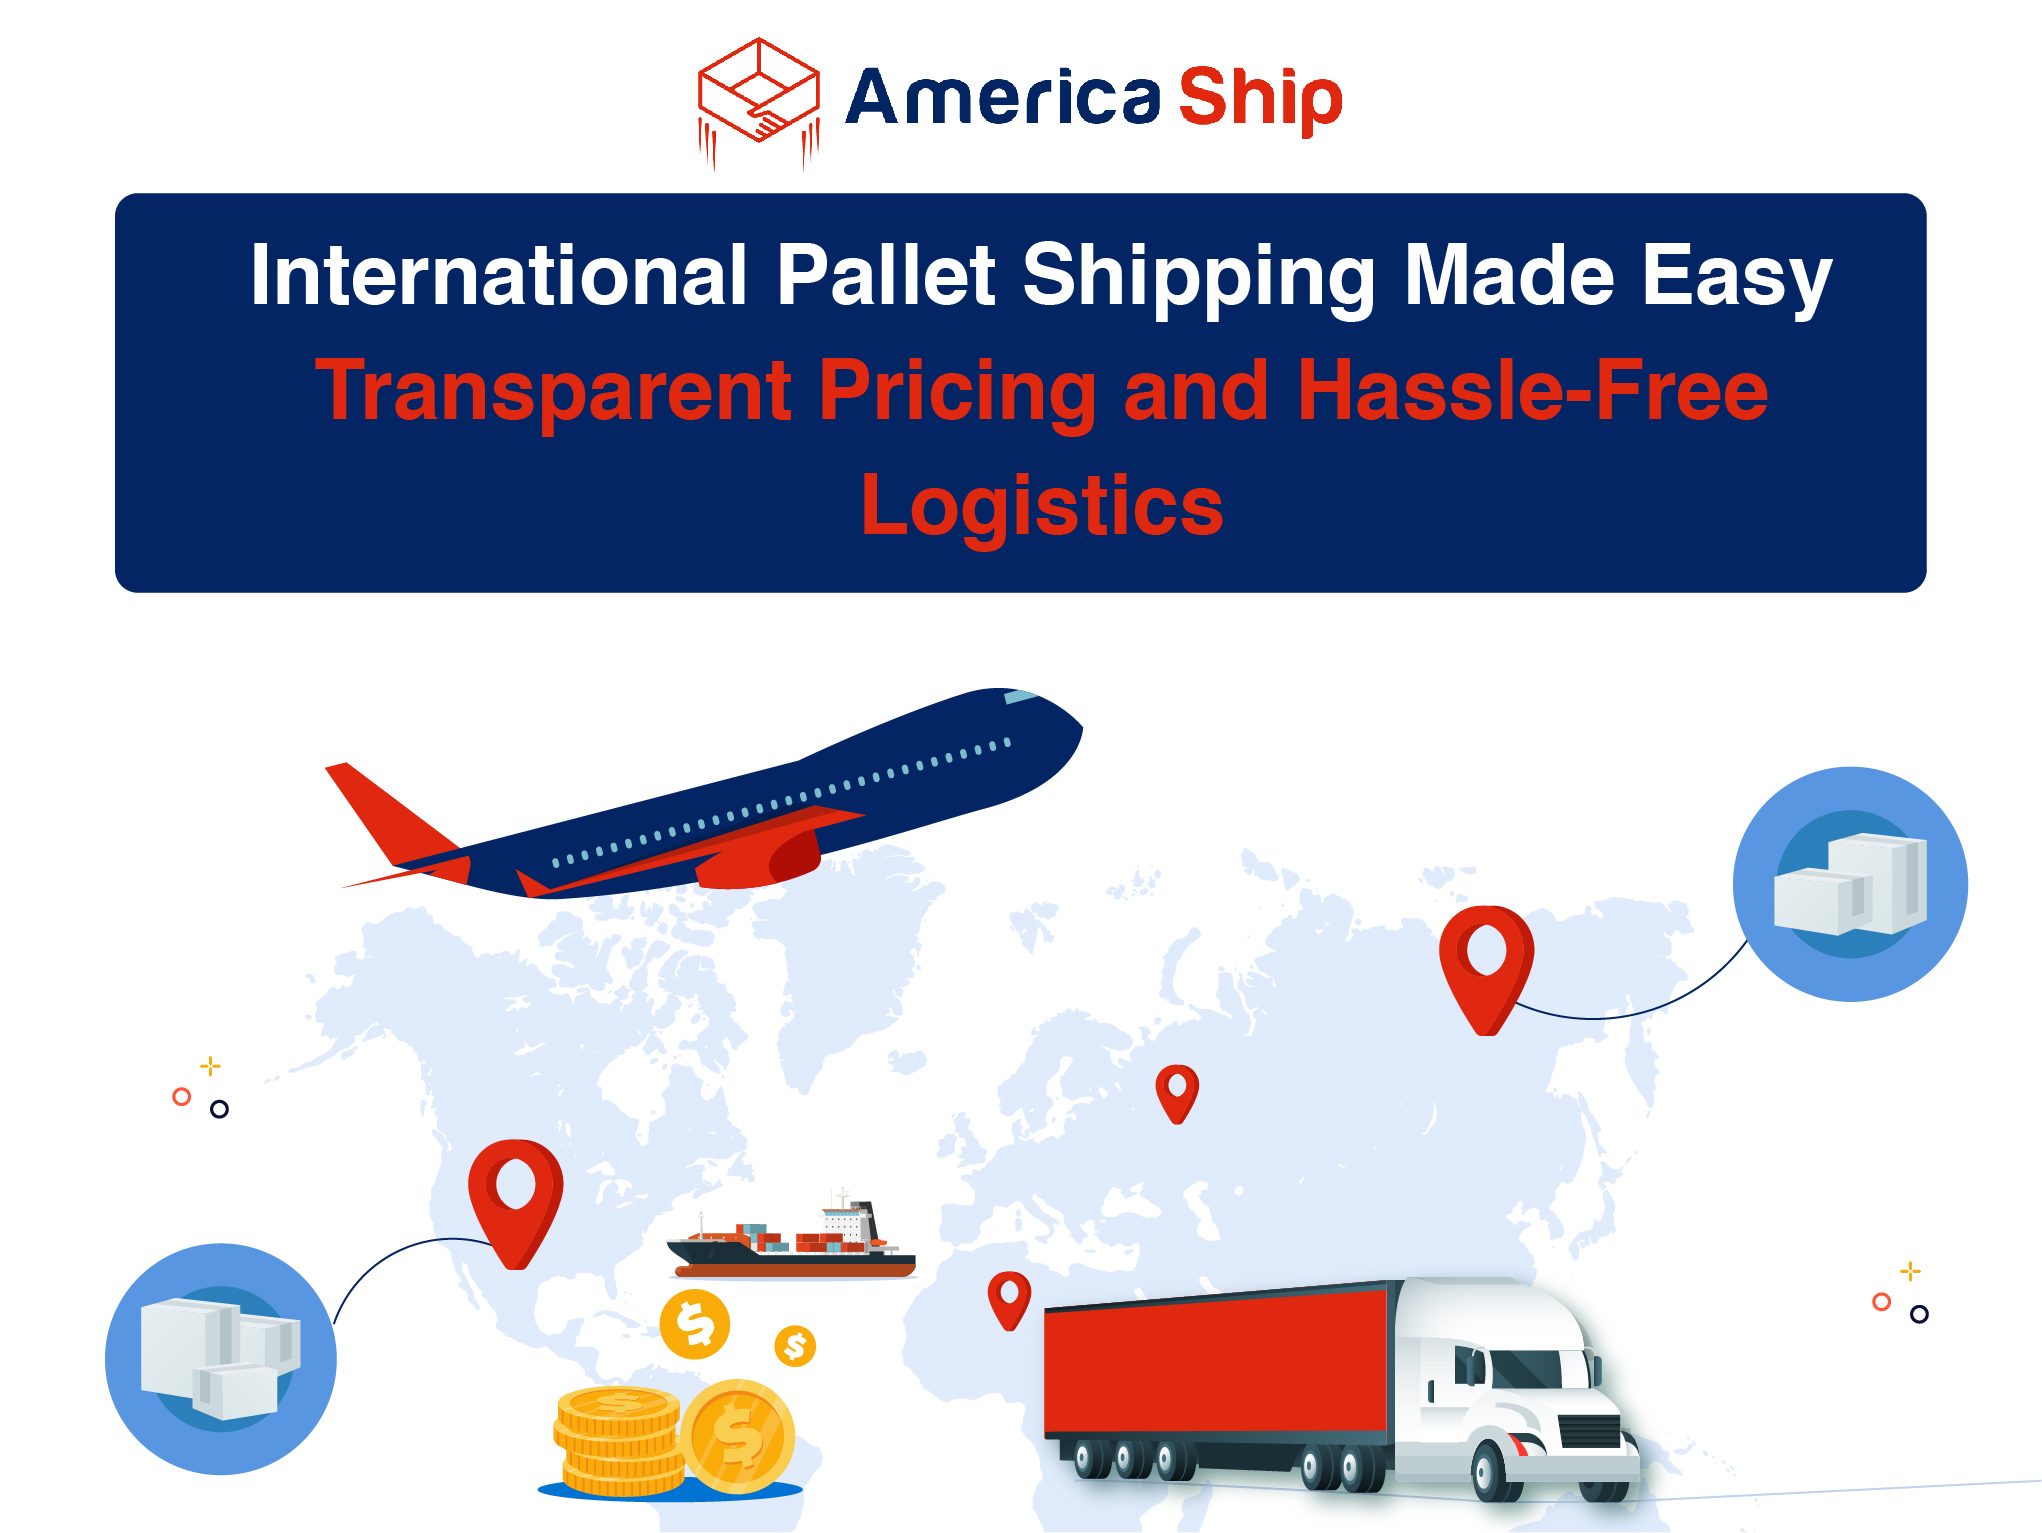 International Pallet Shipping Made Easy: Transparent Pricing and Hassle-Free Logistics